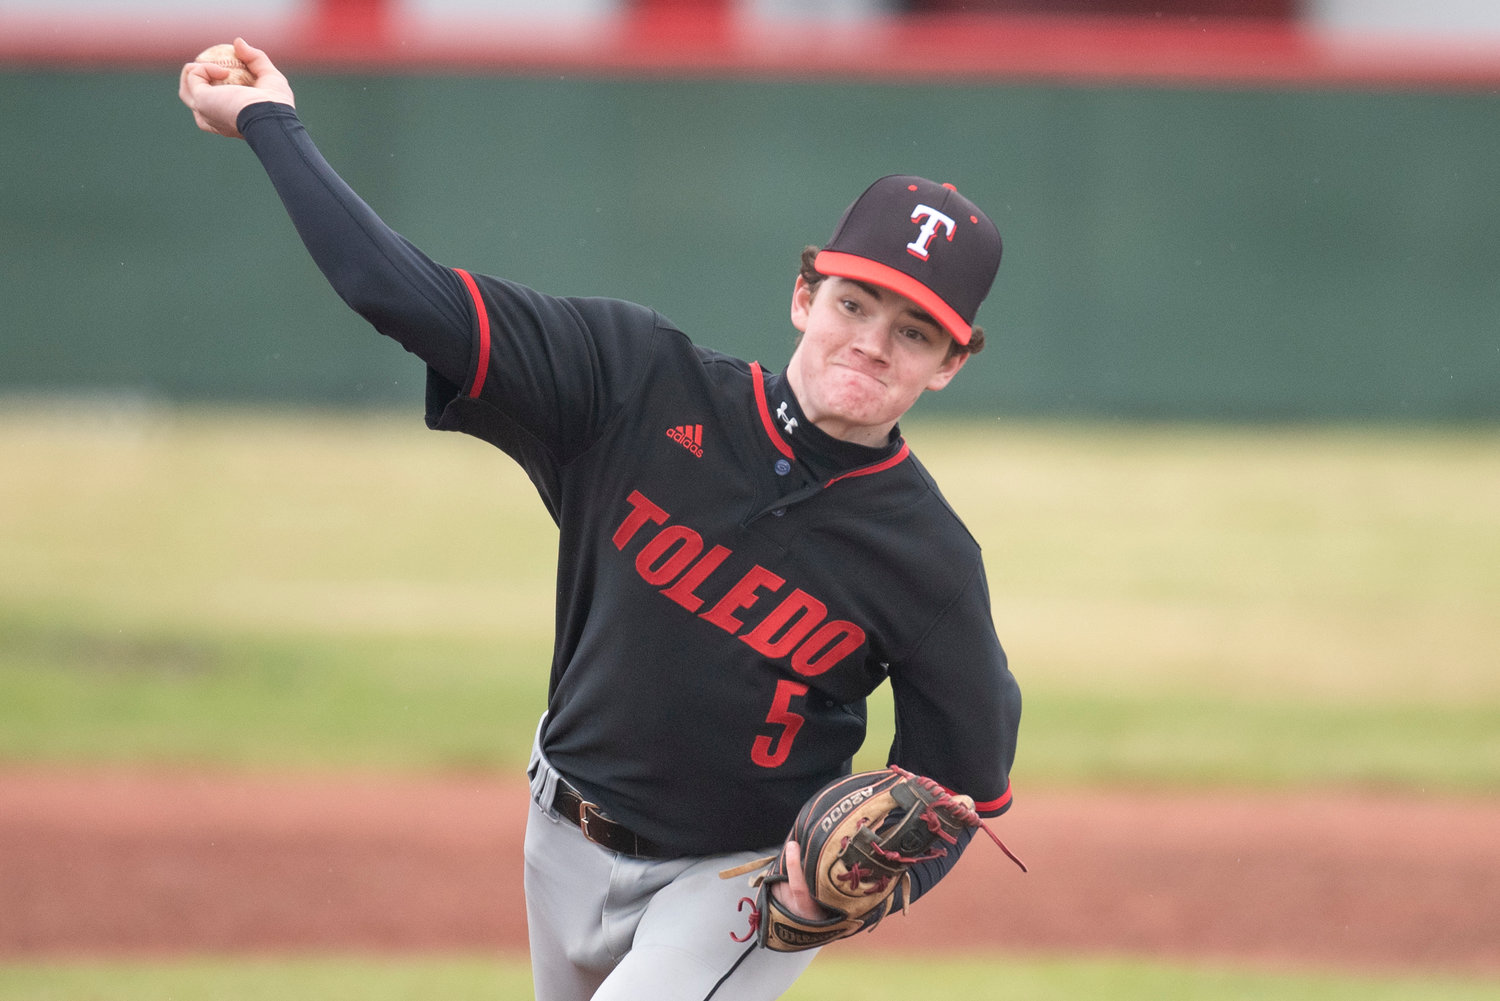 Toledo pitcher Mason Miller tosses to a Tenino batter during a non-league road game on March 16.